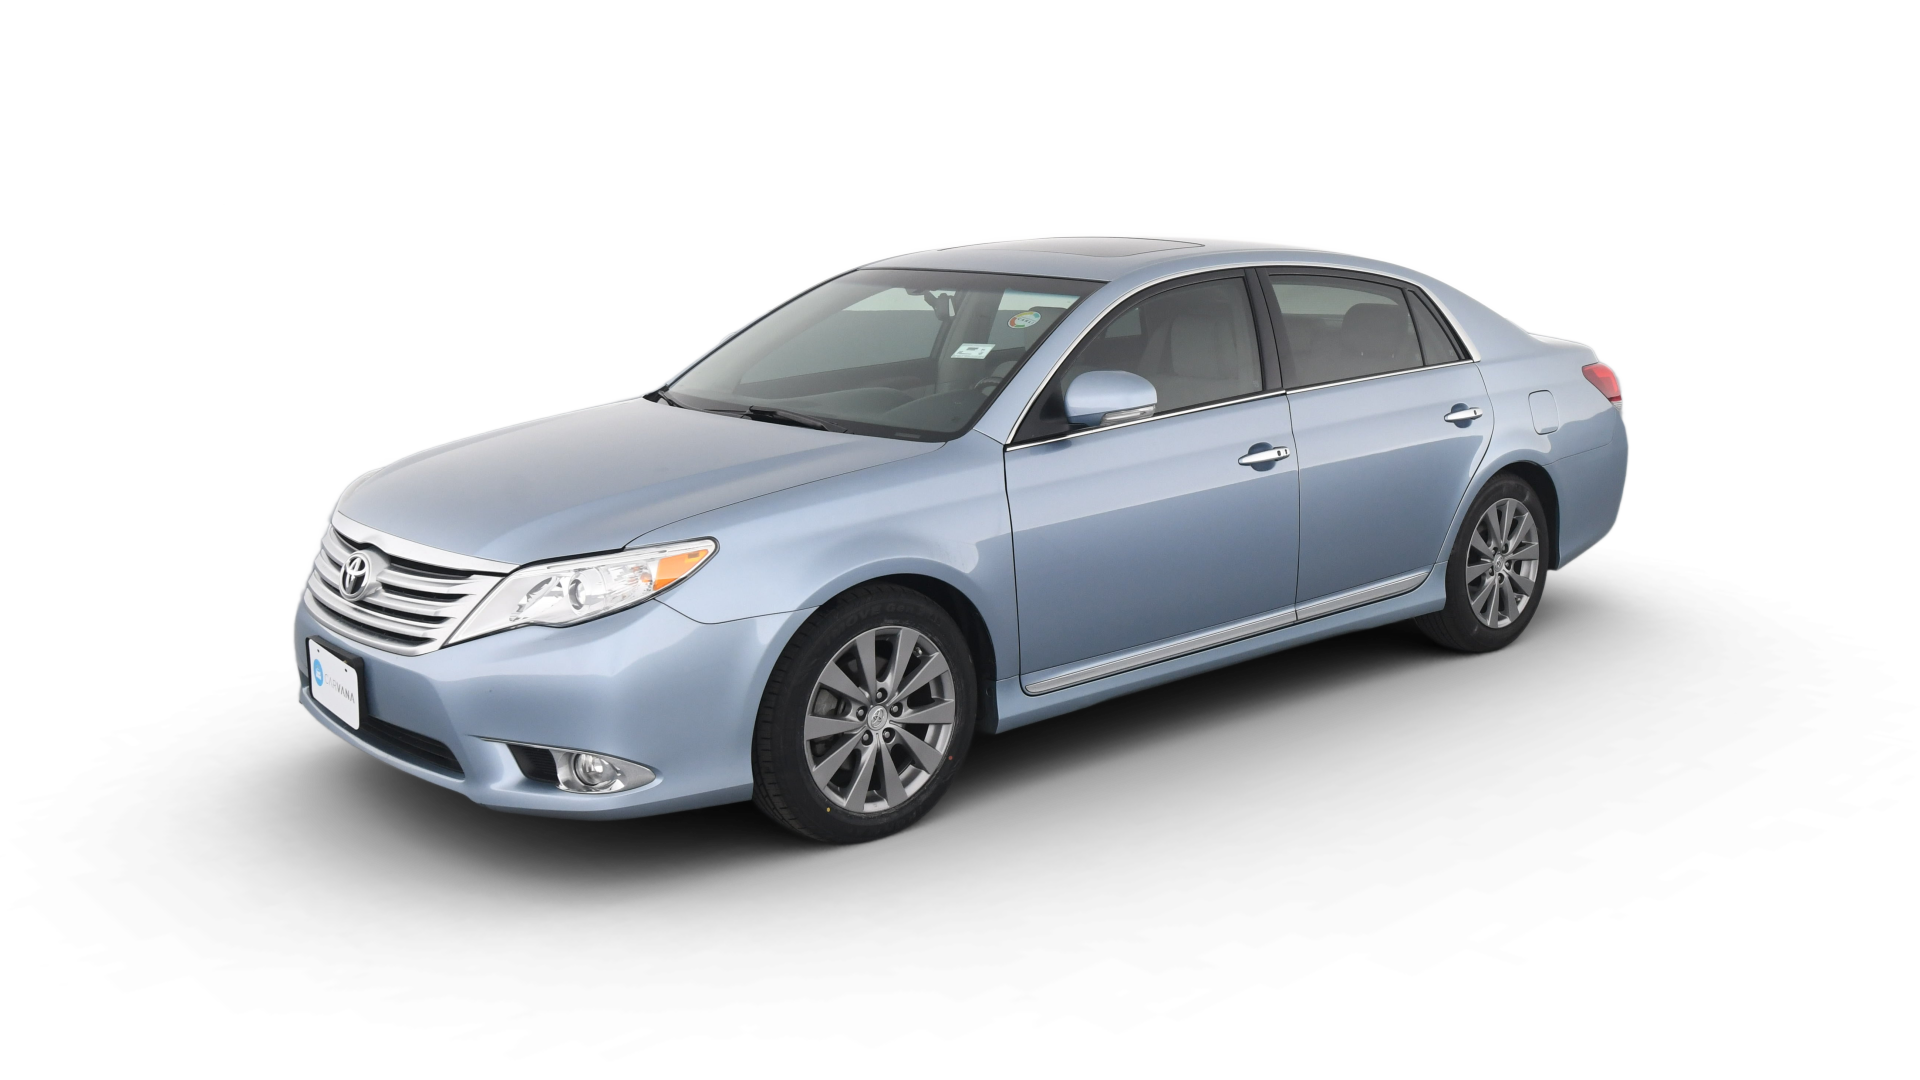 Used 2011 Toyota Avalon For Sale Online | Carvana